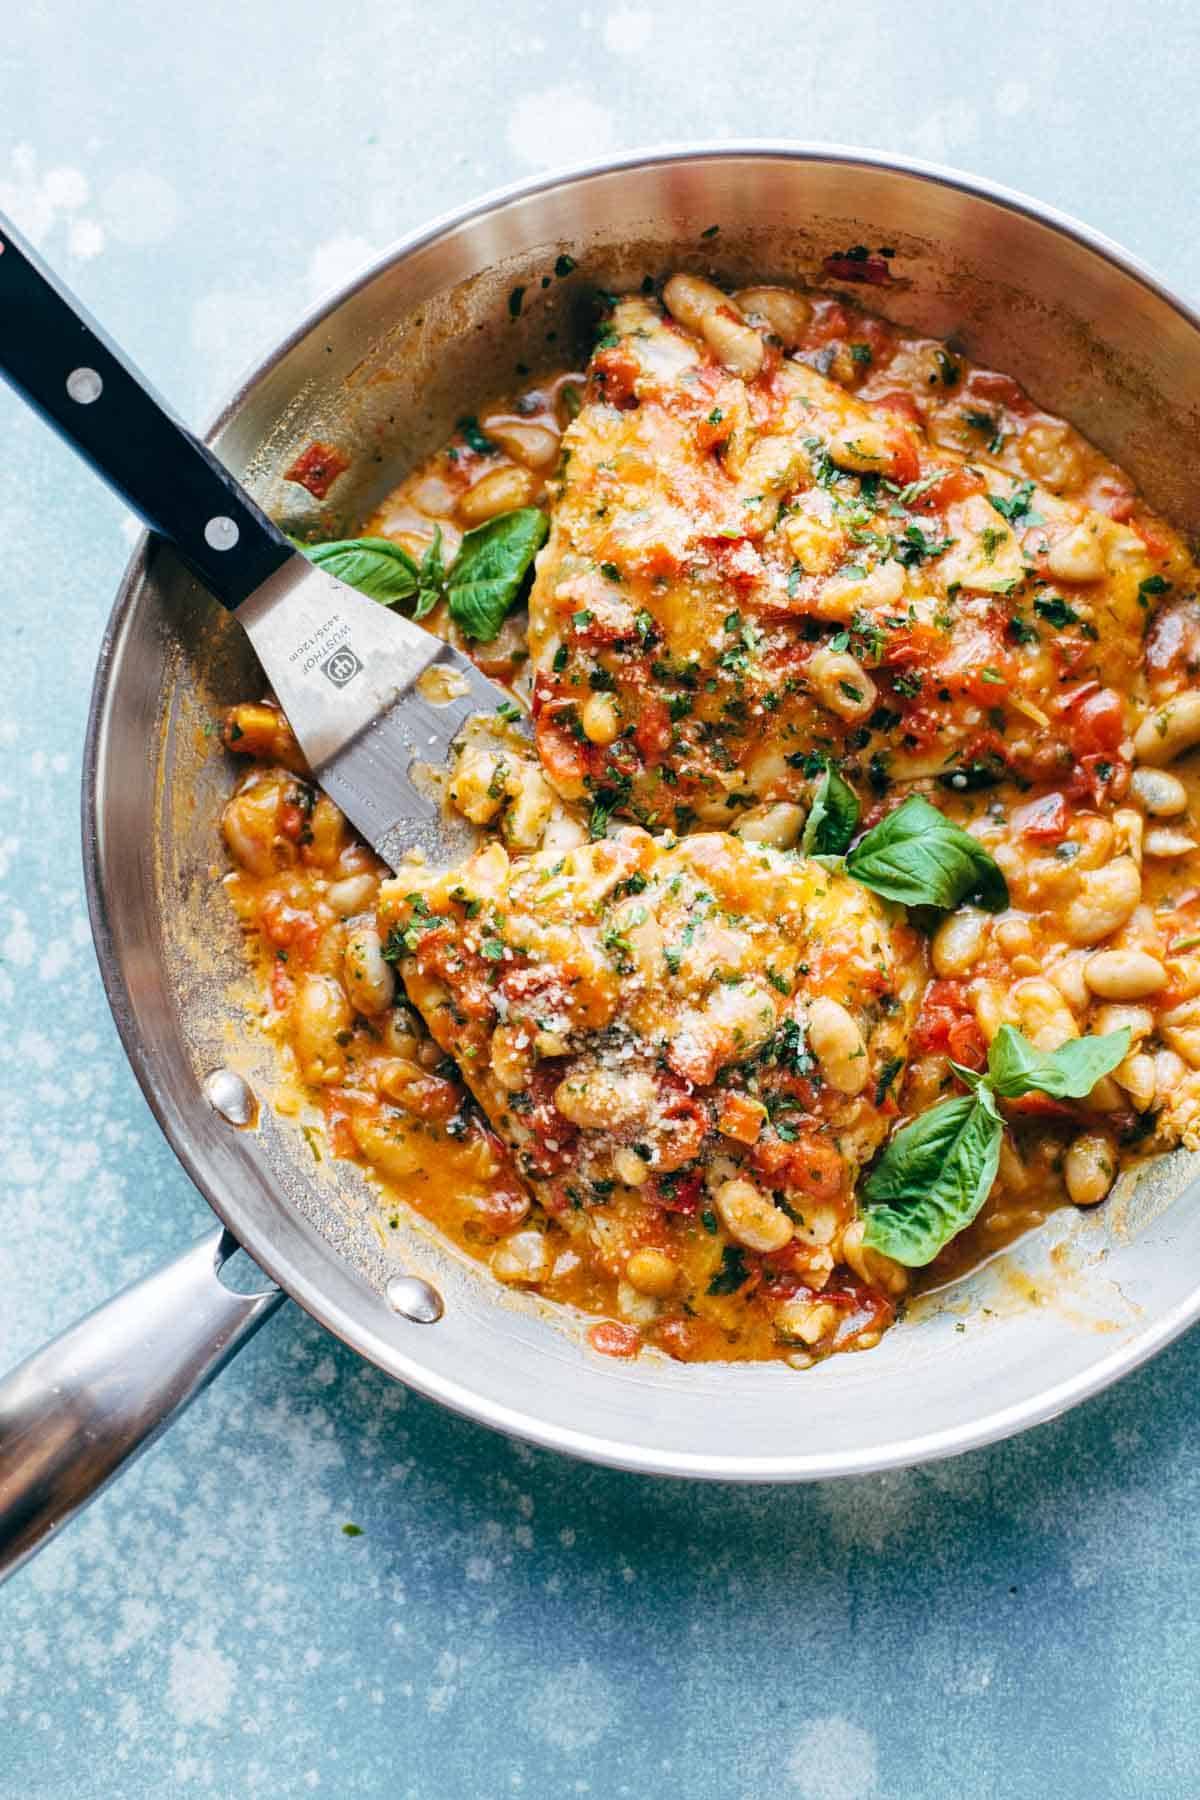 Garlic Basil Barramundi Skillet with Tomato Butter Sauce! SO YUMMY and super easy, with basic ingredients like garlic, basil, tomatoes, white beans, Parmesan, and white fish. Perfect with a green salad and crusty bread.. | pinchofyum.com